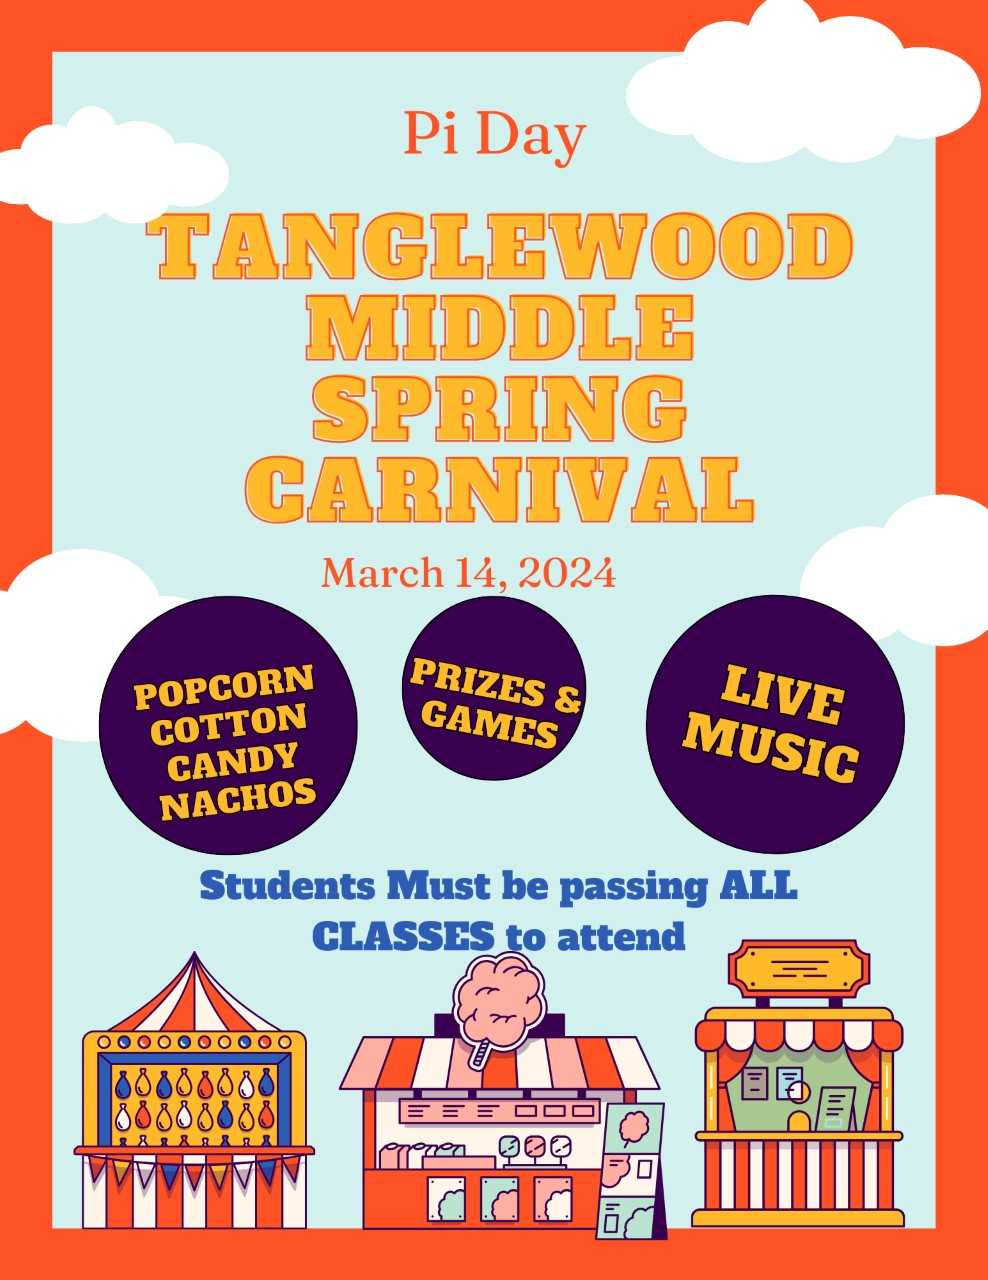 Pi Day Tanglewood Middle Spring Carnival, March 14, 2024. Popcorn, cotton candy, nachos, prizes, games. libe music. Students must be passing all classes to attend